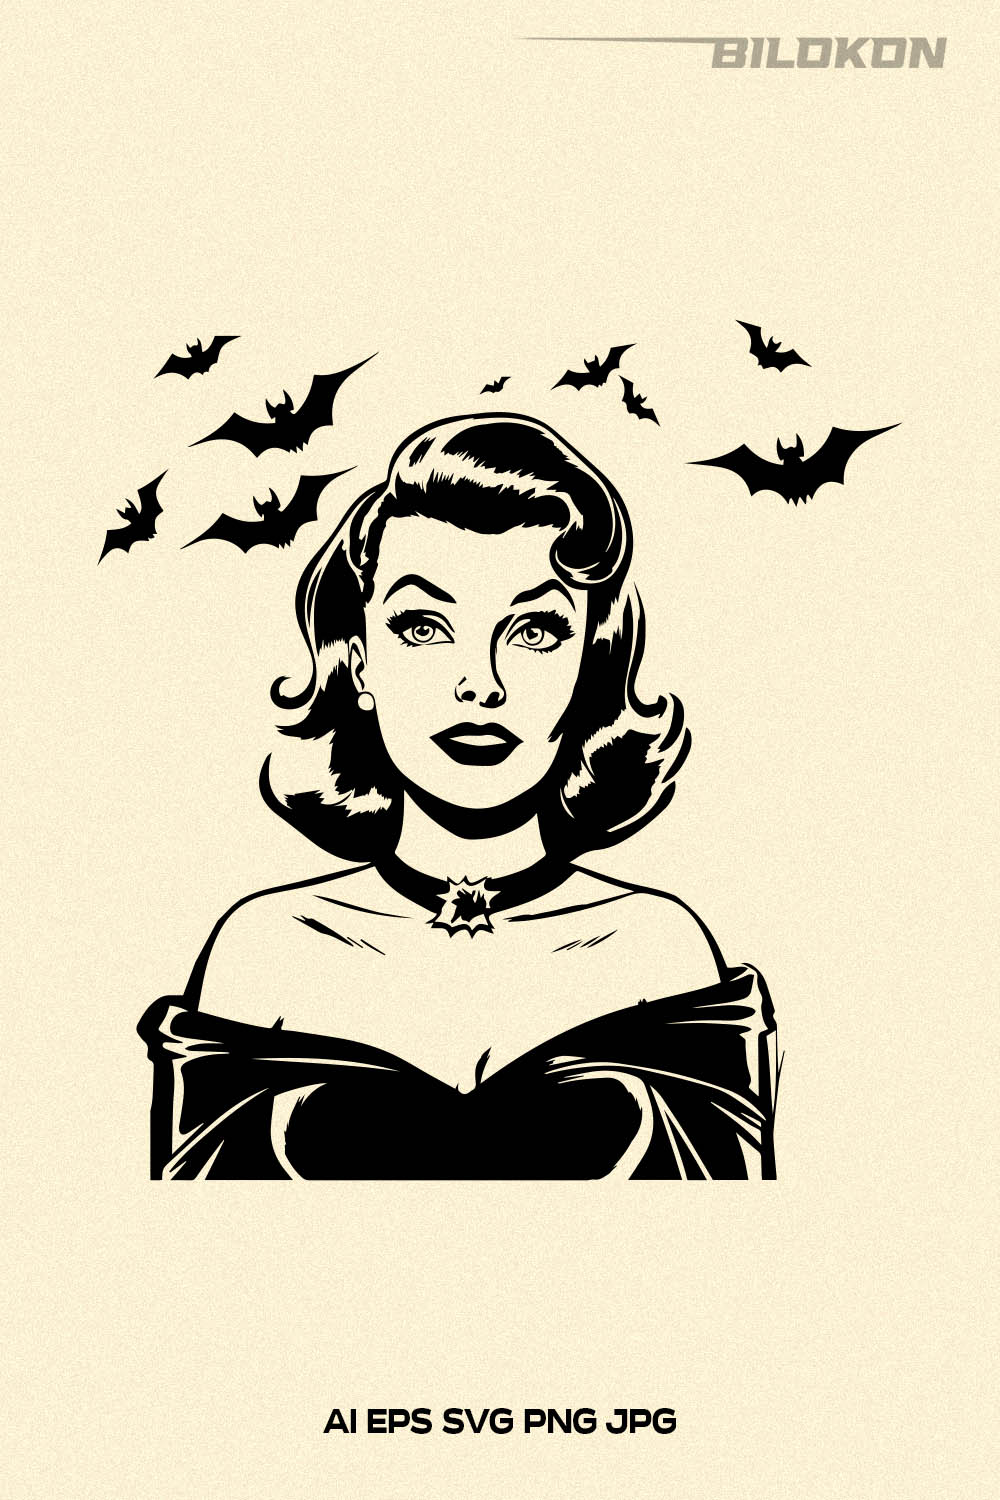 Halloween illustration woman and flying bats them, SVG pinterest preview image.